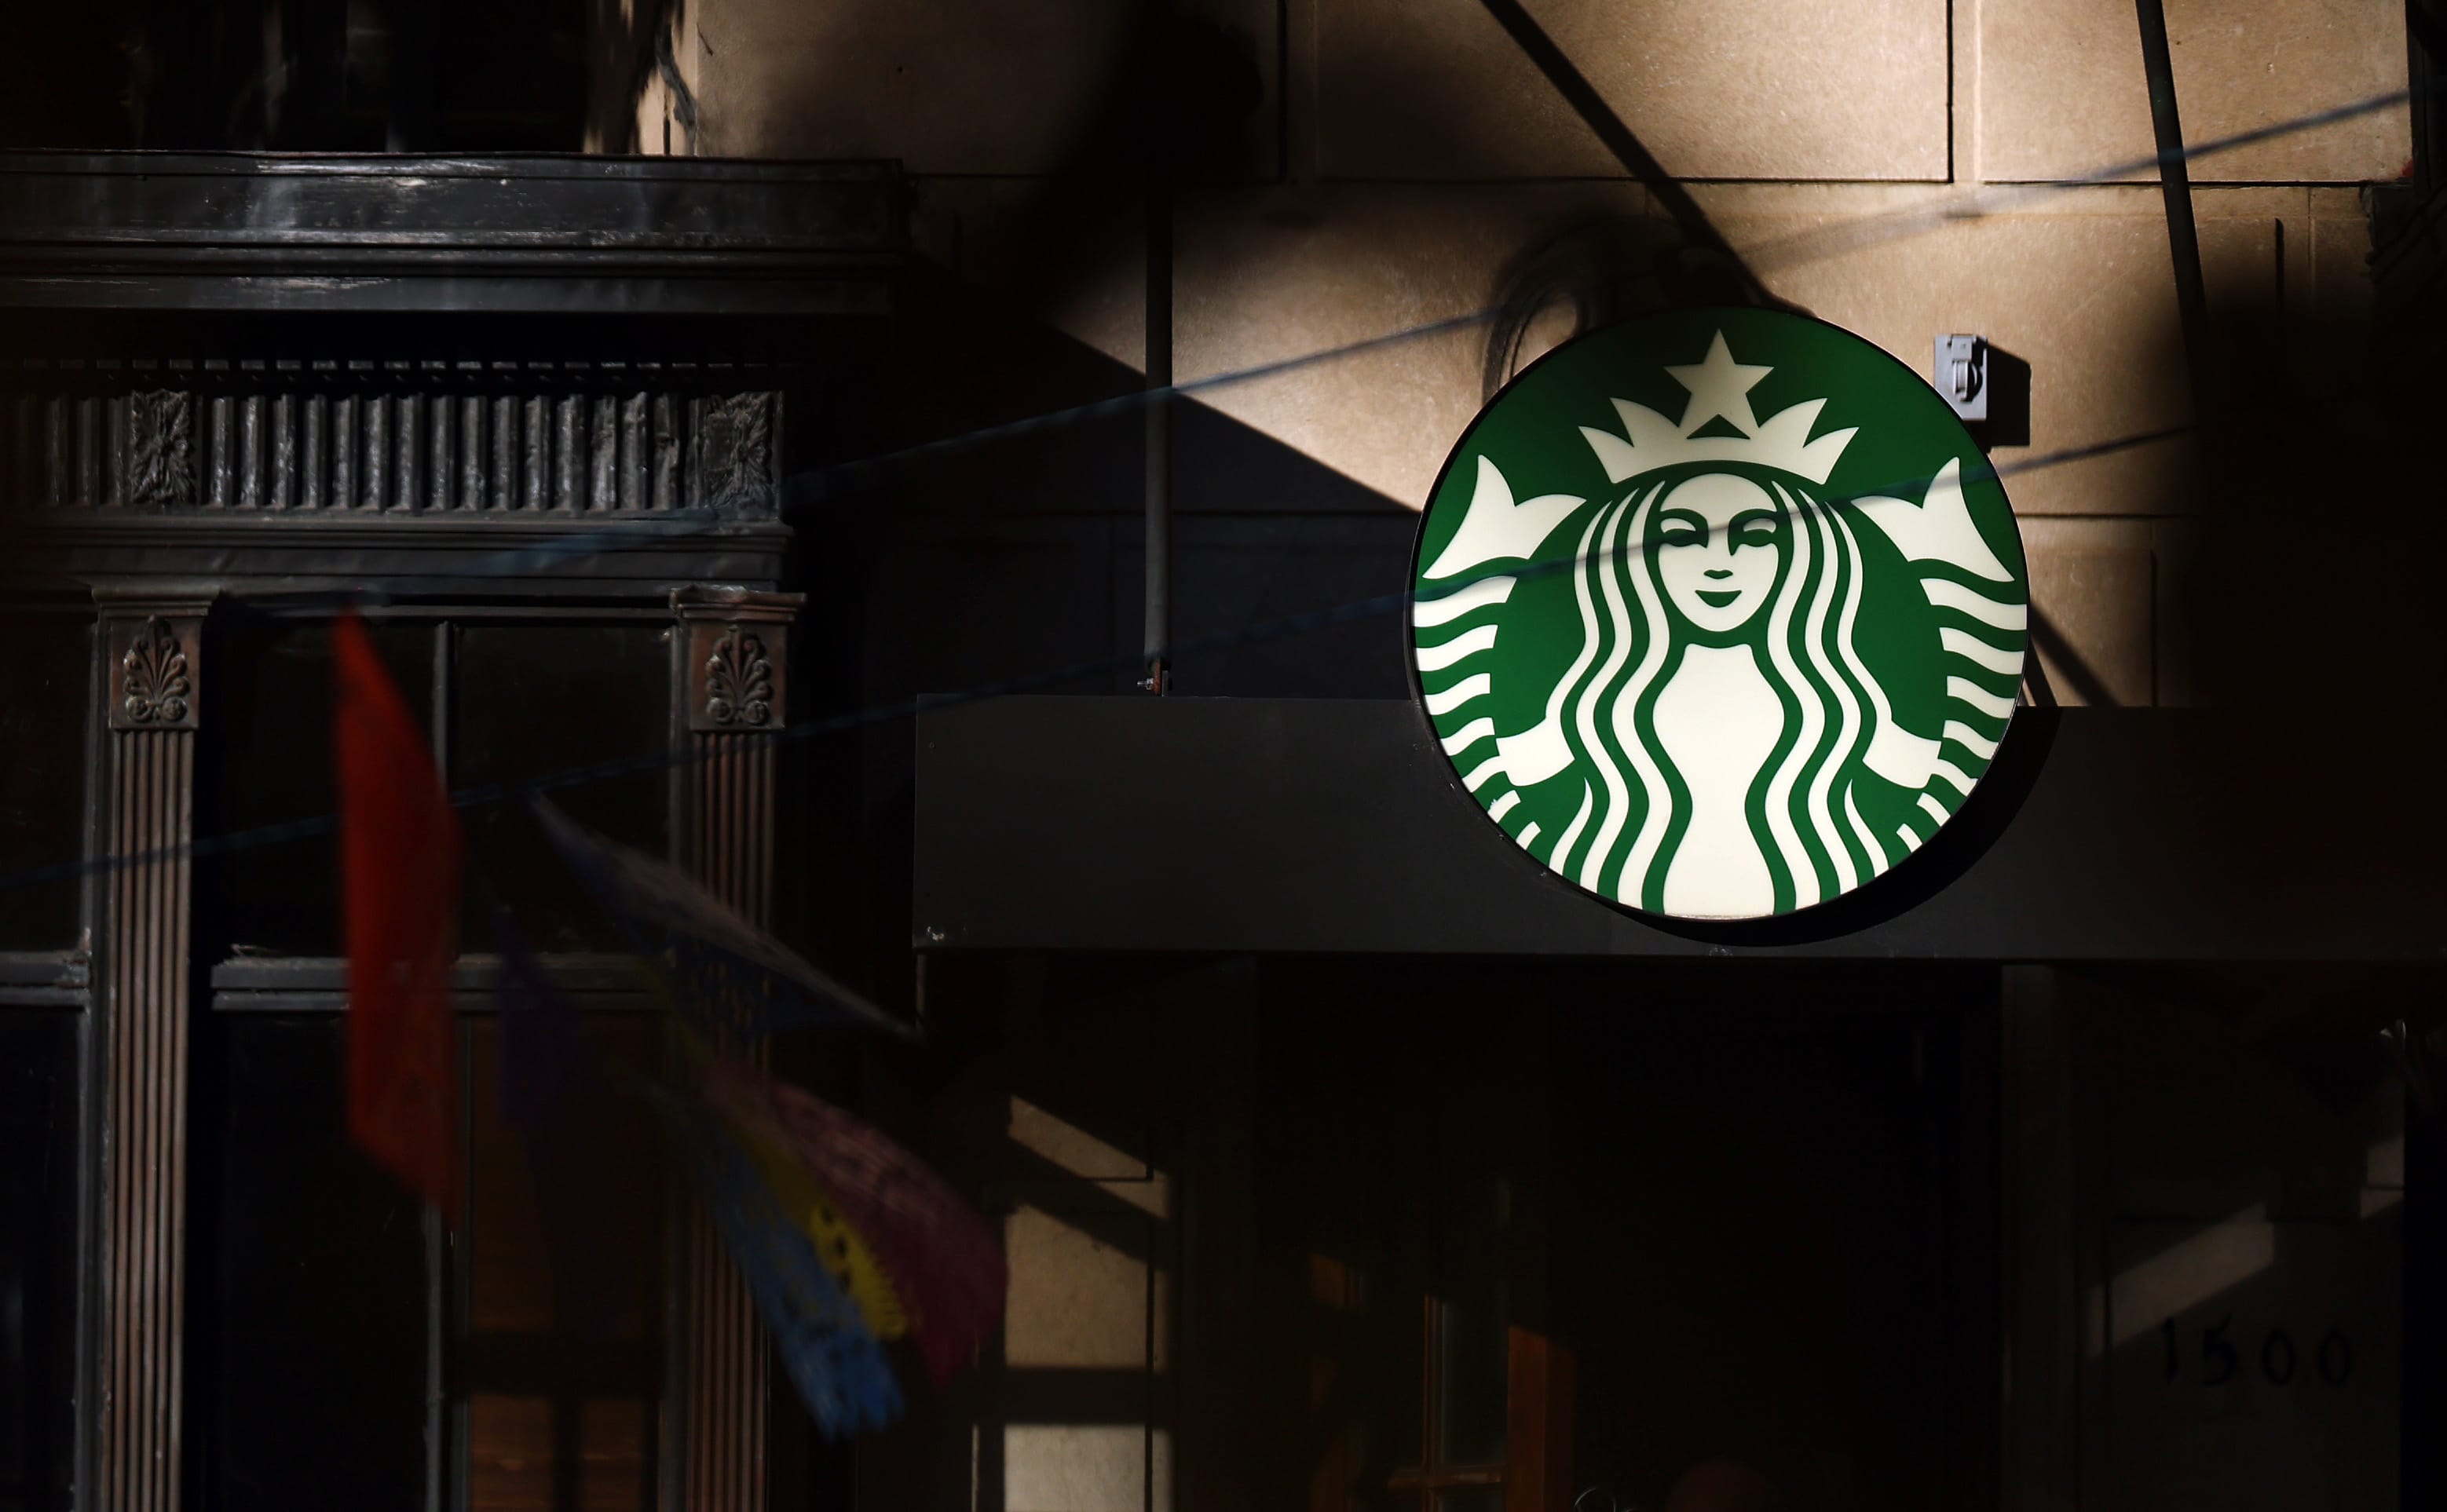 Starbucks, McDonald's and Yum earnings show consumers pulling back